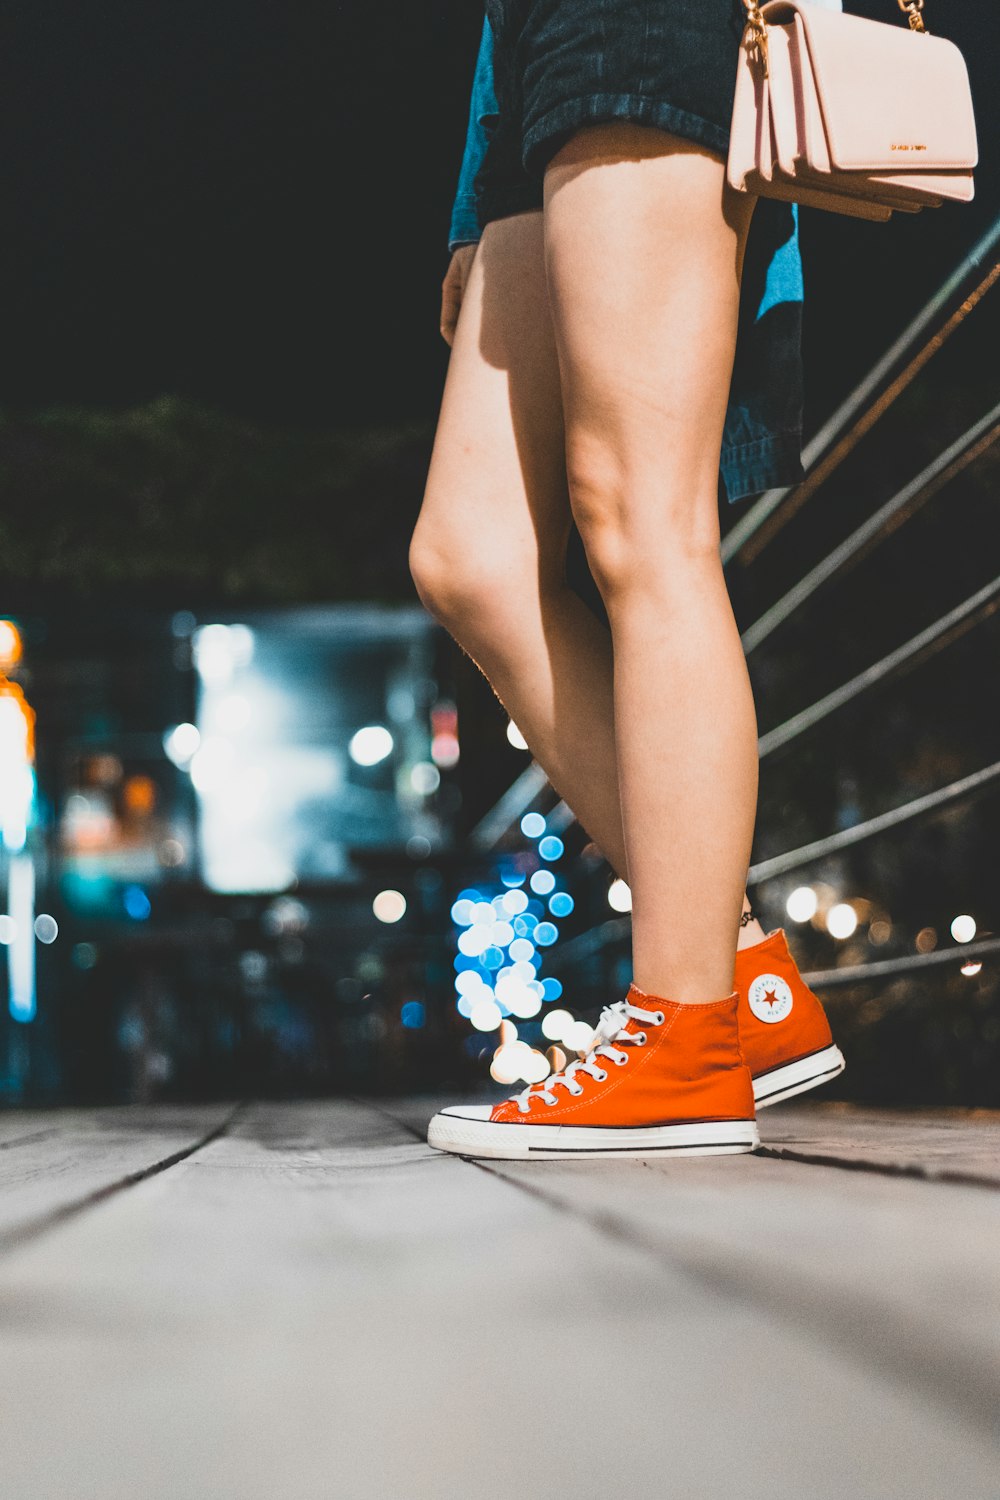 Pair of red converse high-tops photo – Free Converse Image on Unsplash